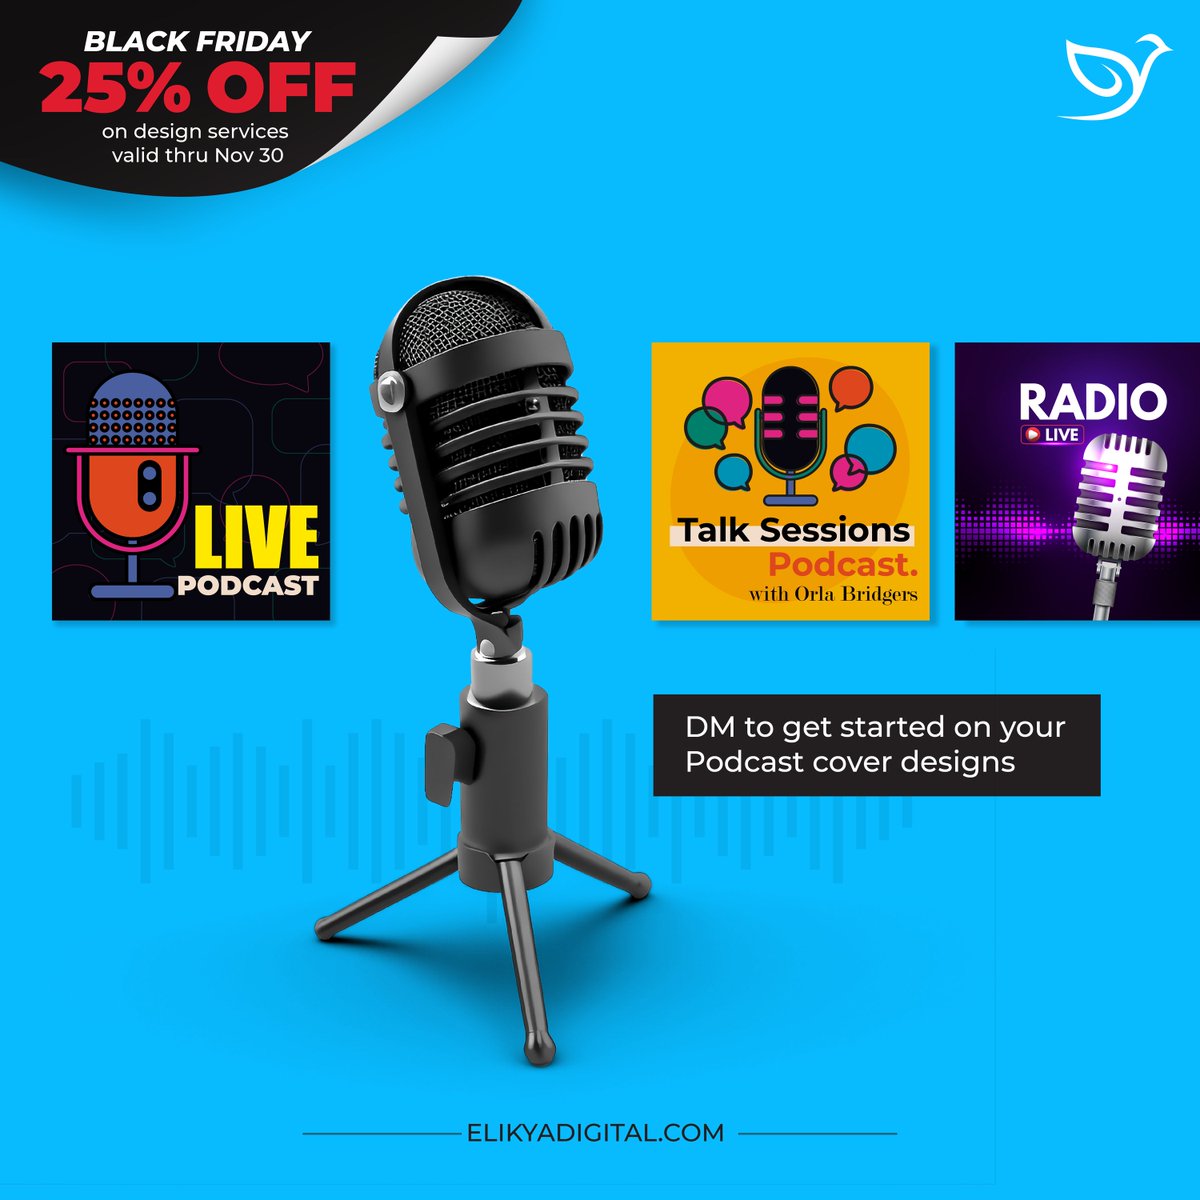 A captivating #podcast #cover design is the ultimate hook for grabbing potential listeners' attention. Click on elikyadigital.com to get started! 

Take advantage of our special Black Friday Sale with 25% Off on design services.

#podcaster #podcasterlife  #blackfridaysale